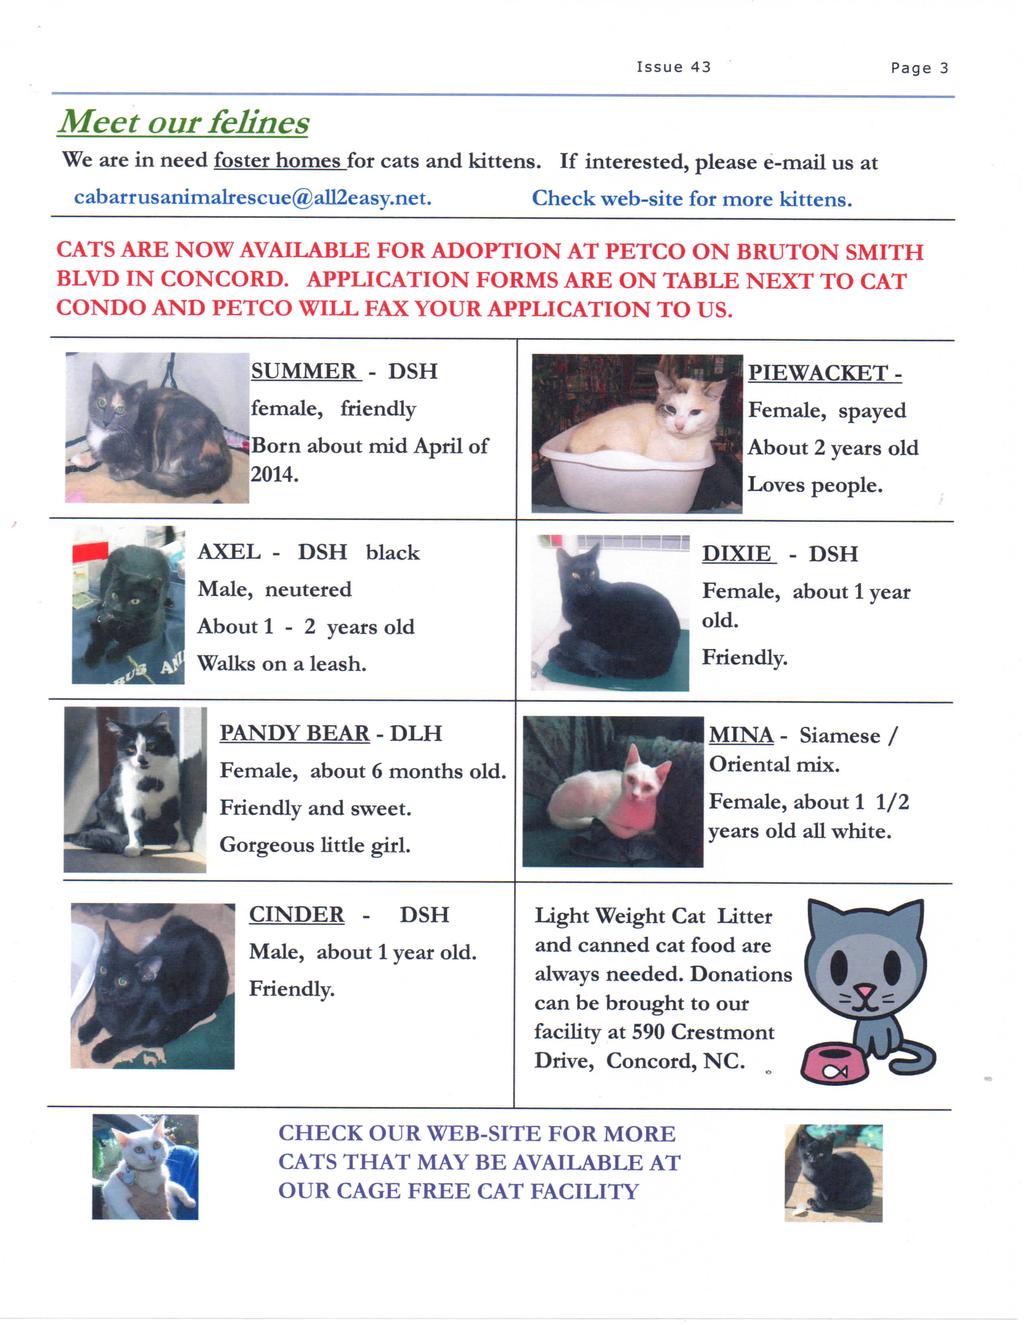 Meet our felines Issue 43 Page 3 We are in need foster homes for cats and kittens. If interested, please e-mail us at cabarrusanimalrescue@all2easy.net. Check web-site for more kittens.